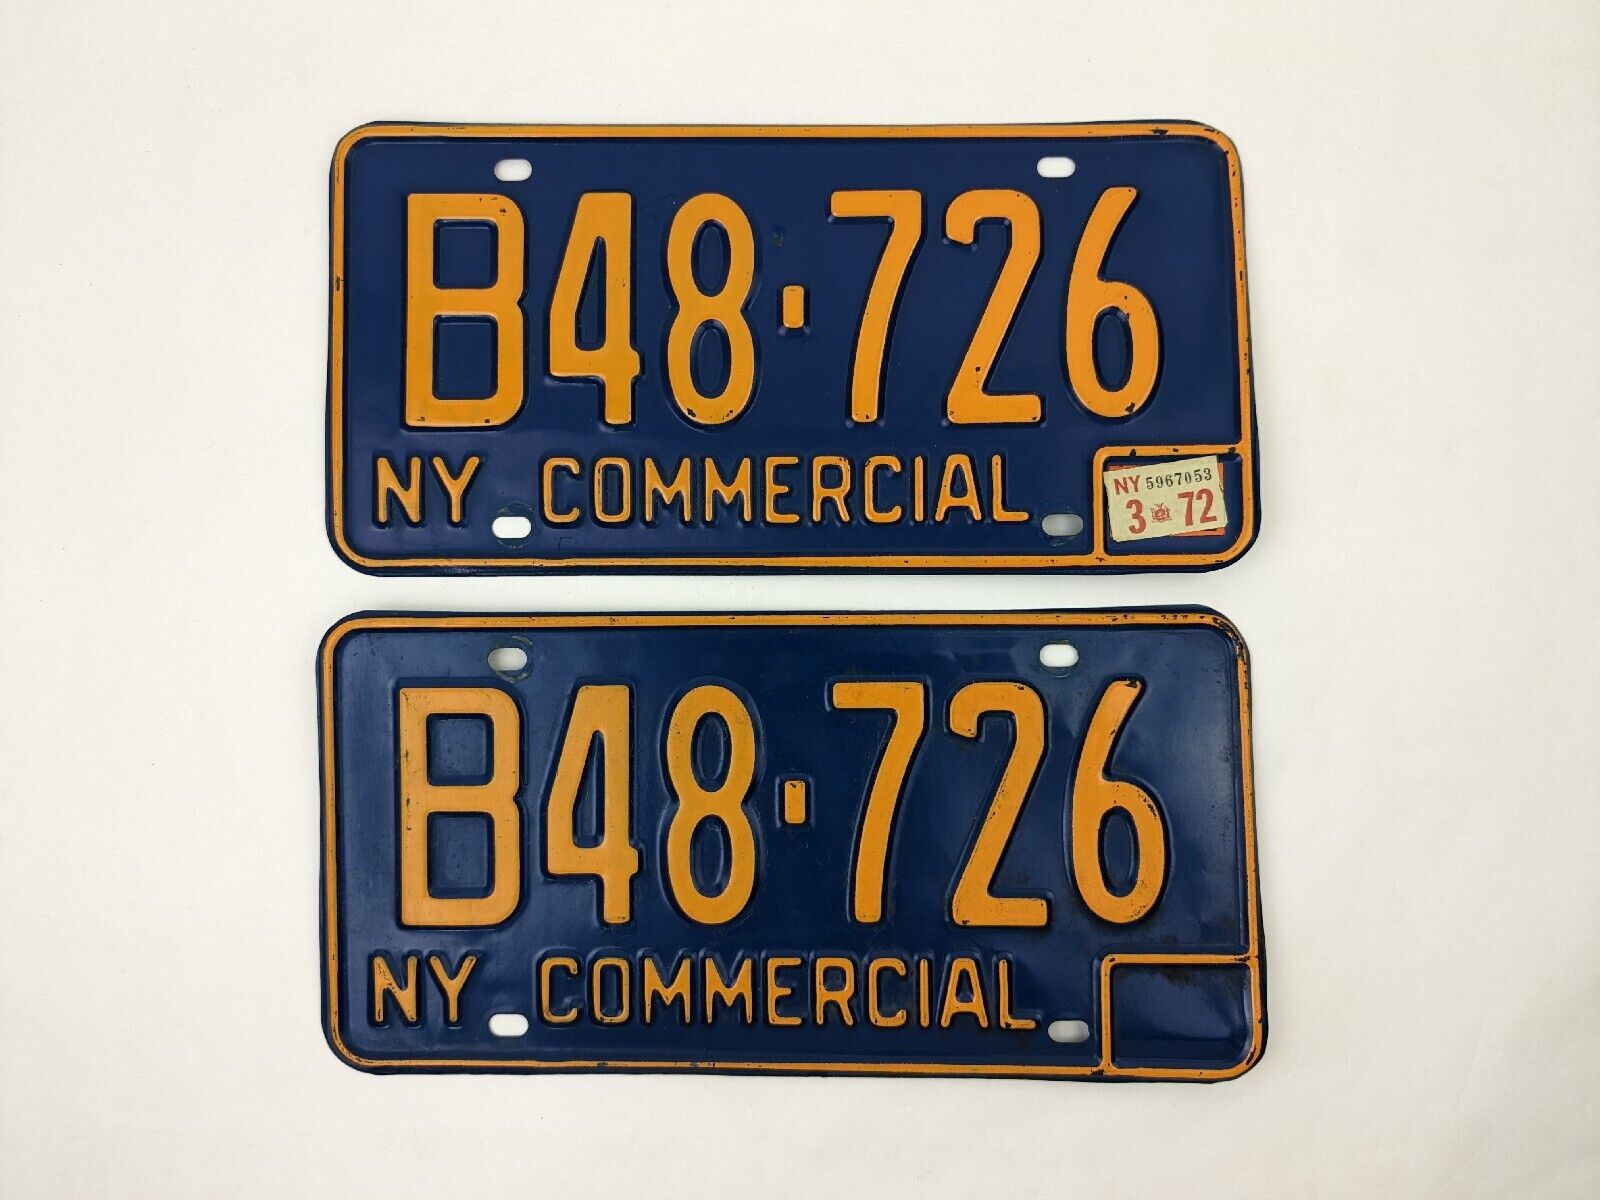 Vtg New York \'66-\'73 Commercial License Plates Matching Pair B48-726 Blue Yellow